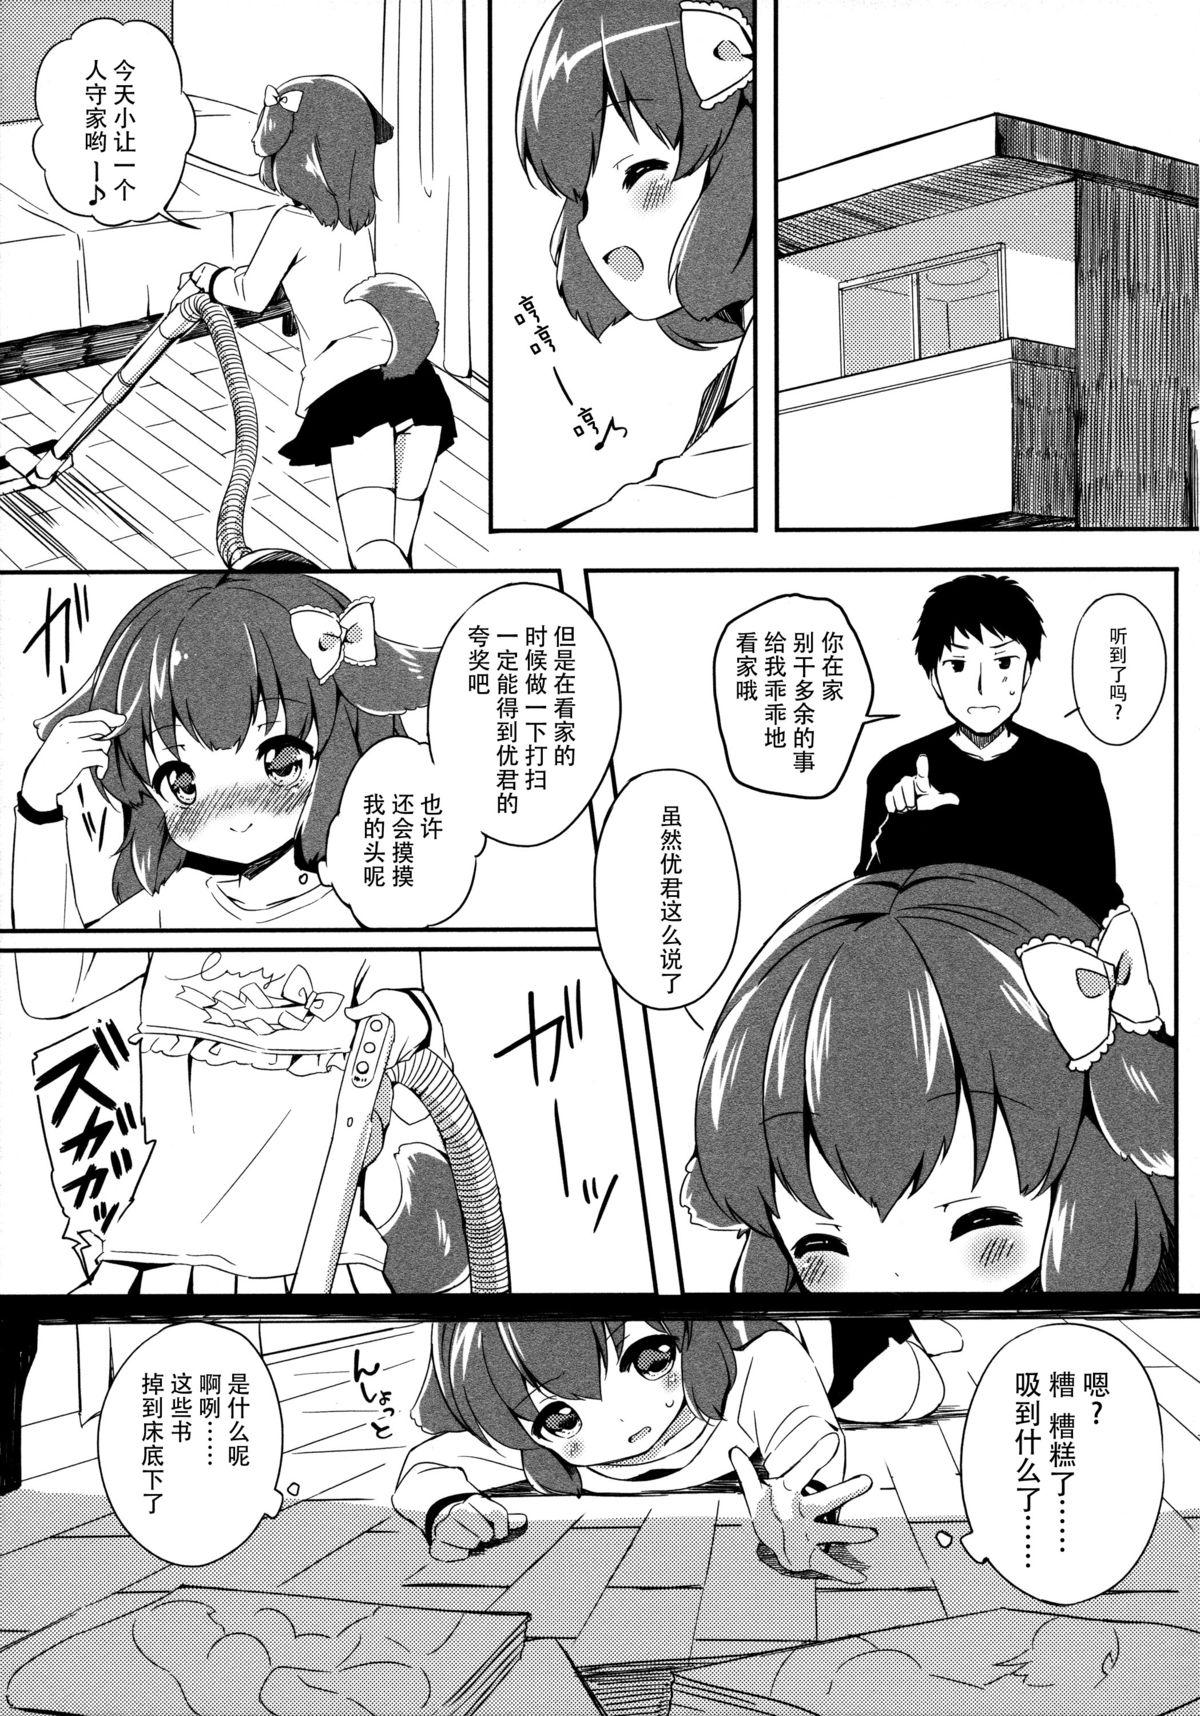 Speculum Kyou no Wanko LoliCo 02 Thuylinh - Page 5